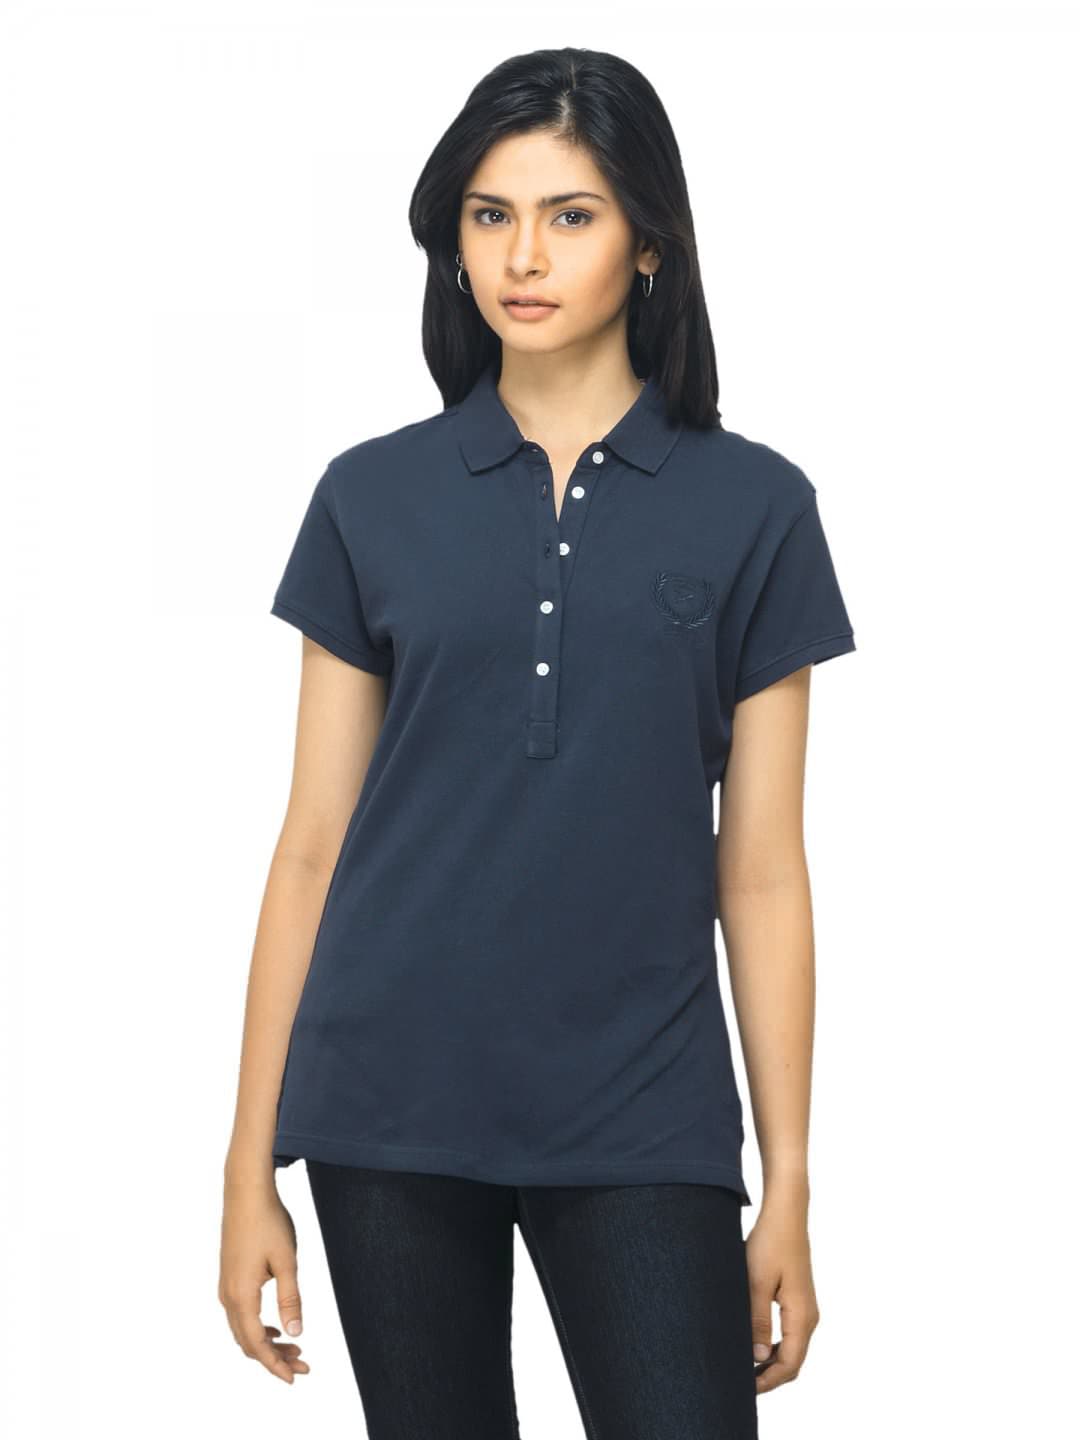 Scullers For Her Navy Blue T-shirt